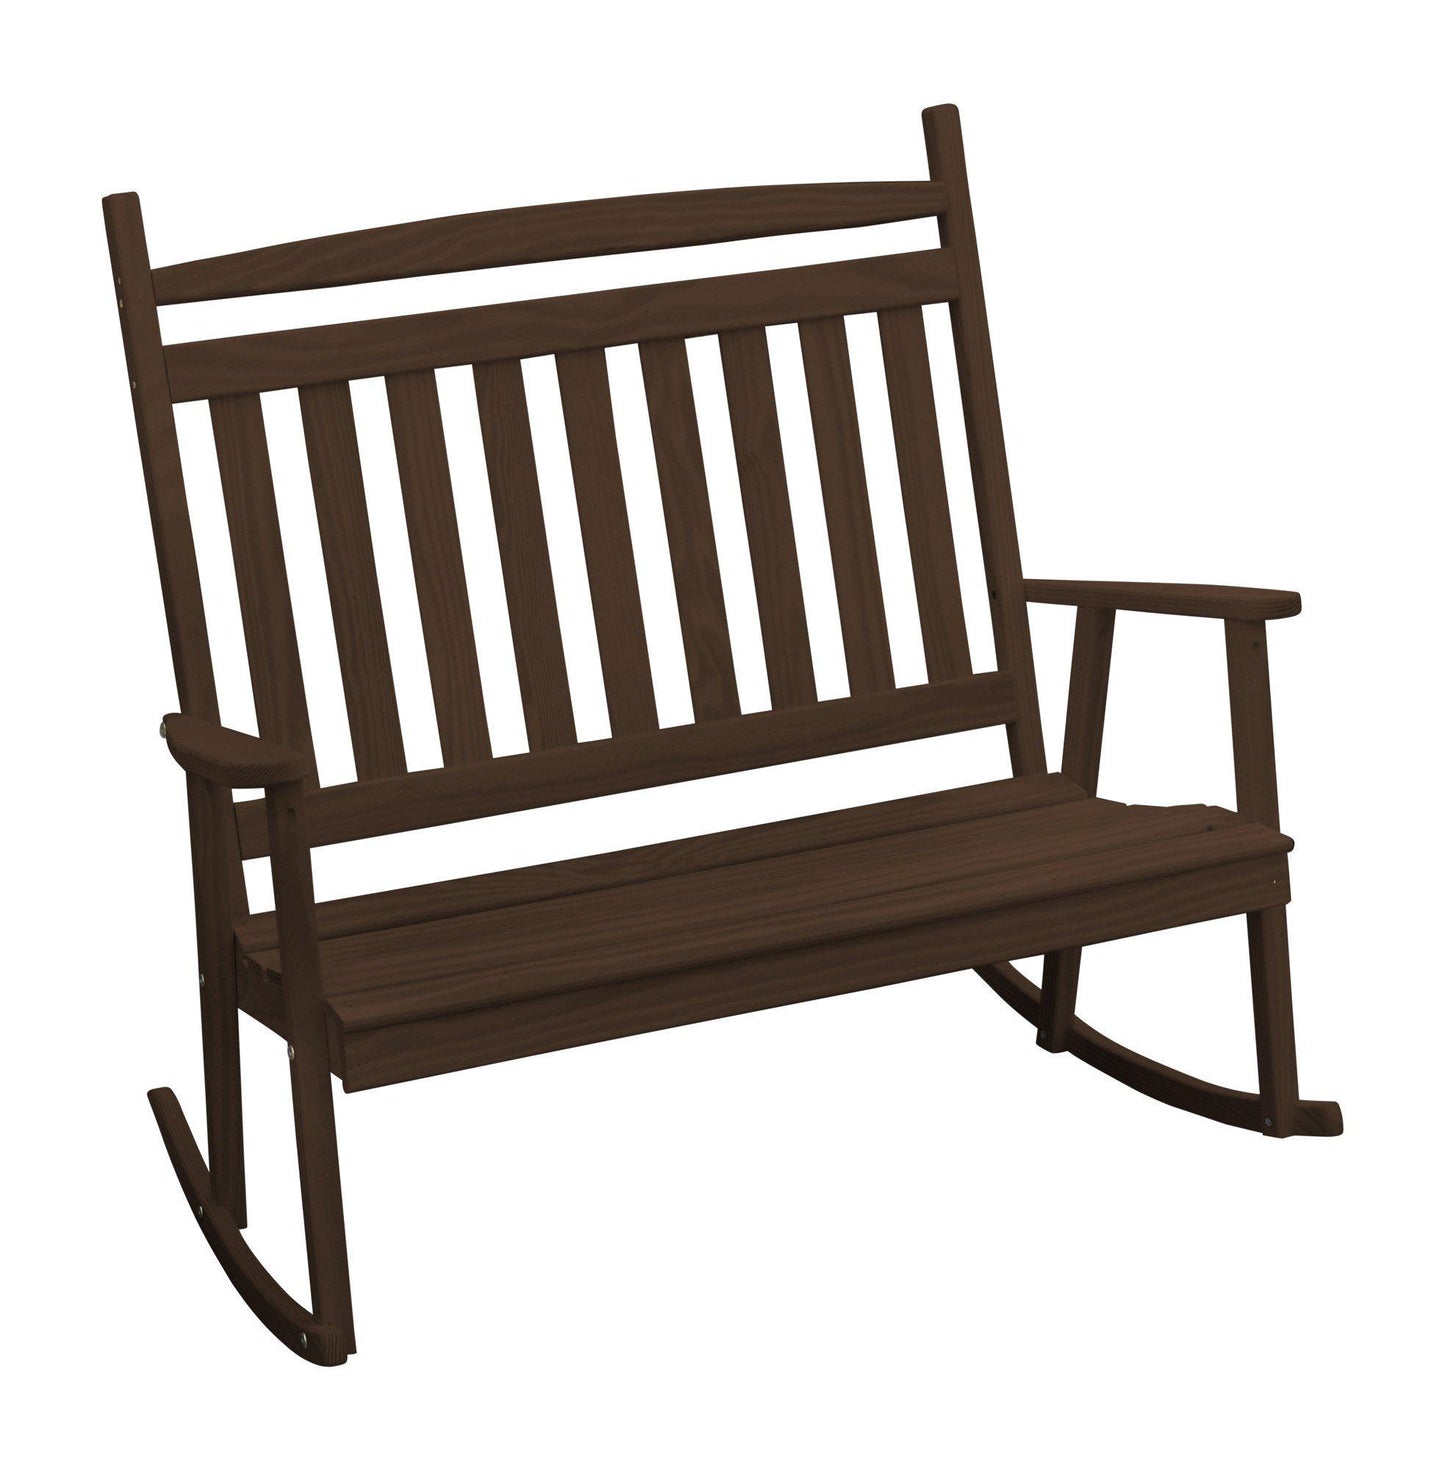 A&L FURNITURE CO. Yellow Pine Double Classic Porch Rocking Chair - LEAD TIME TO SHIP 10 BUSINESS DAYS